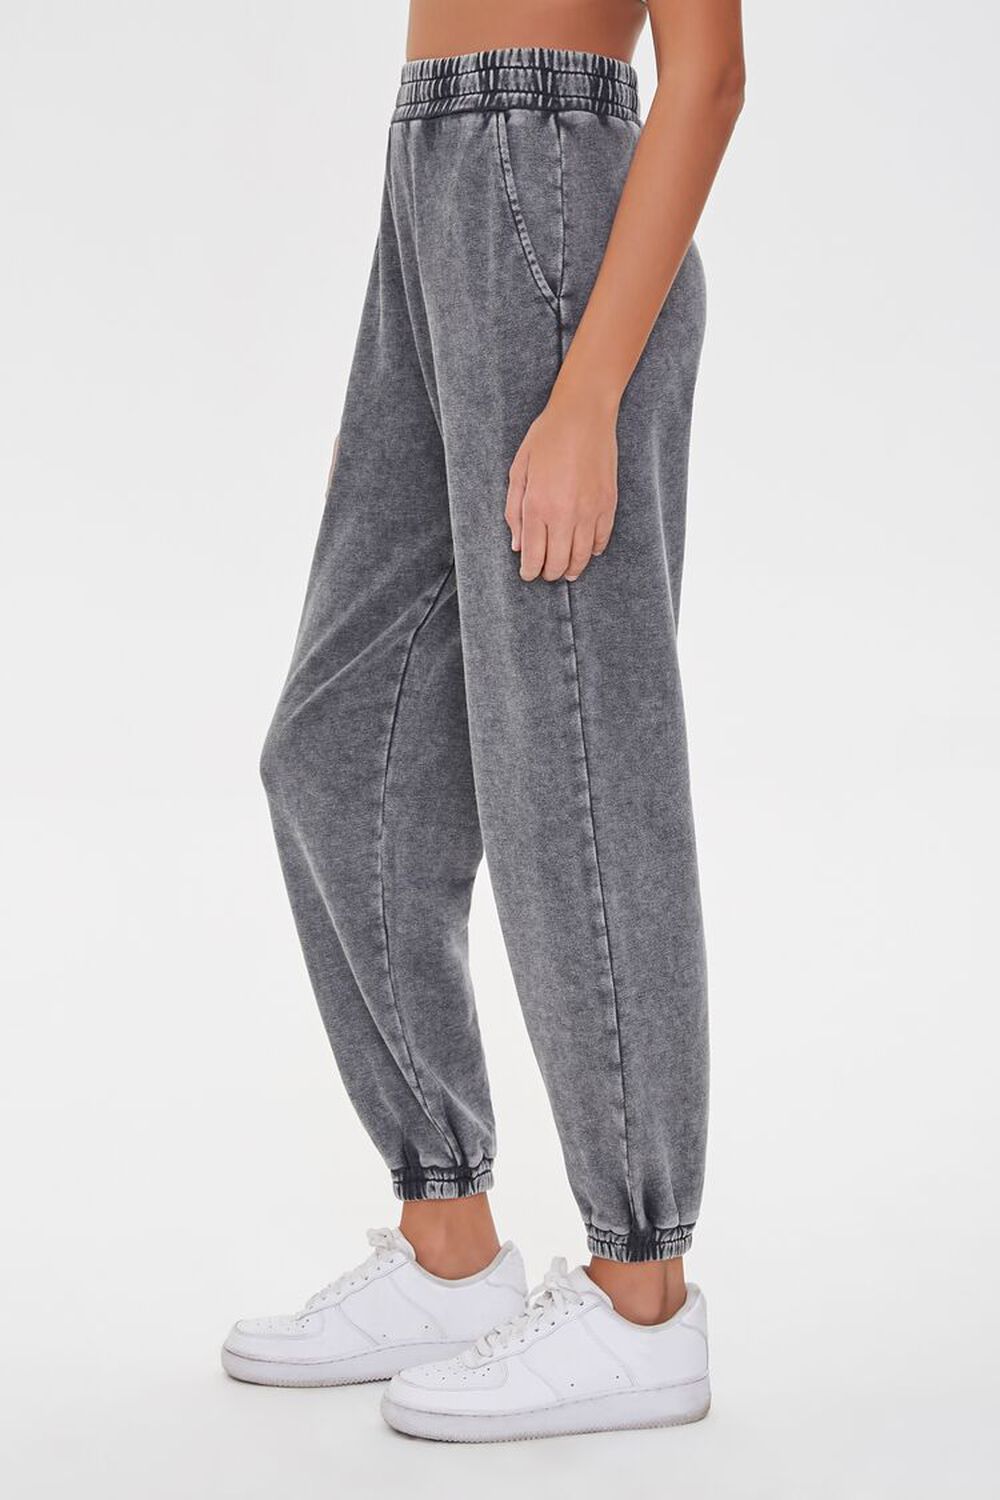 CHARCOAL Oil Wash Smocked Joggers, image 3